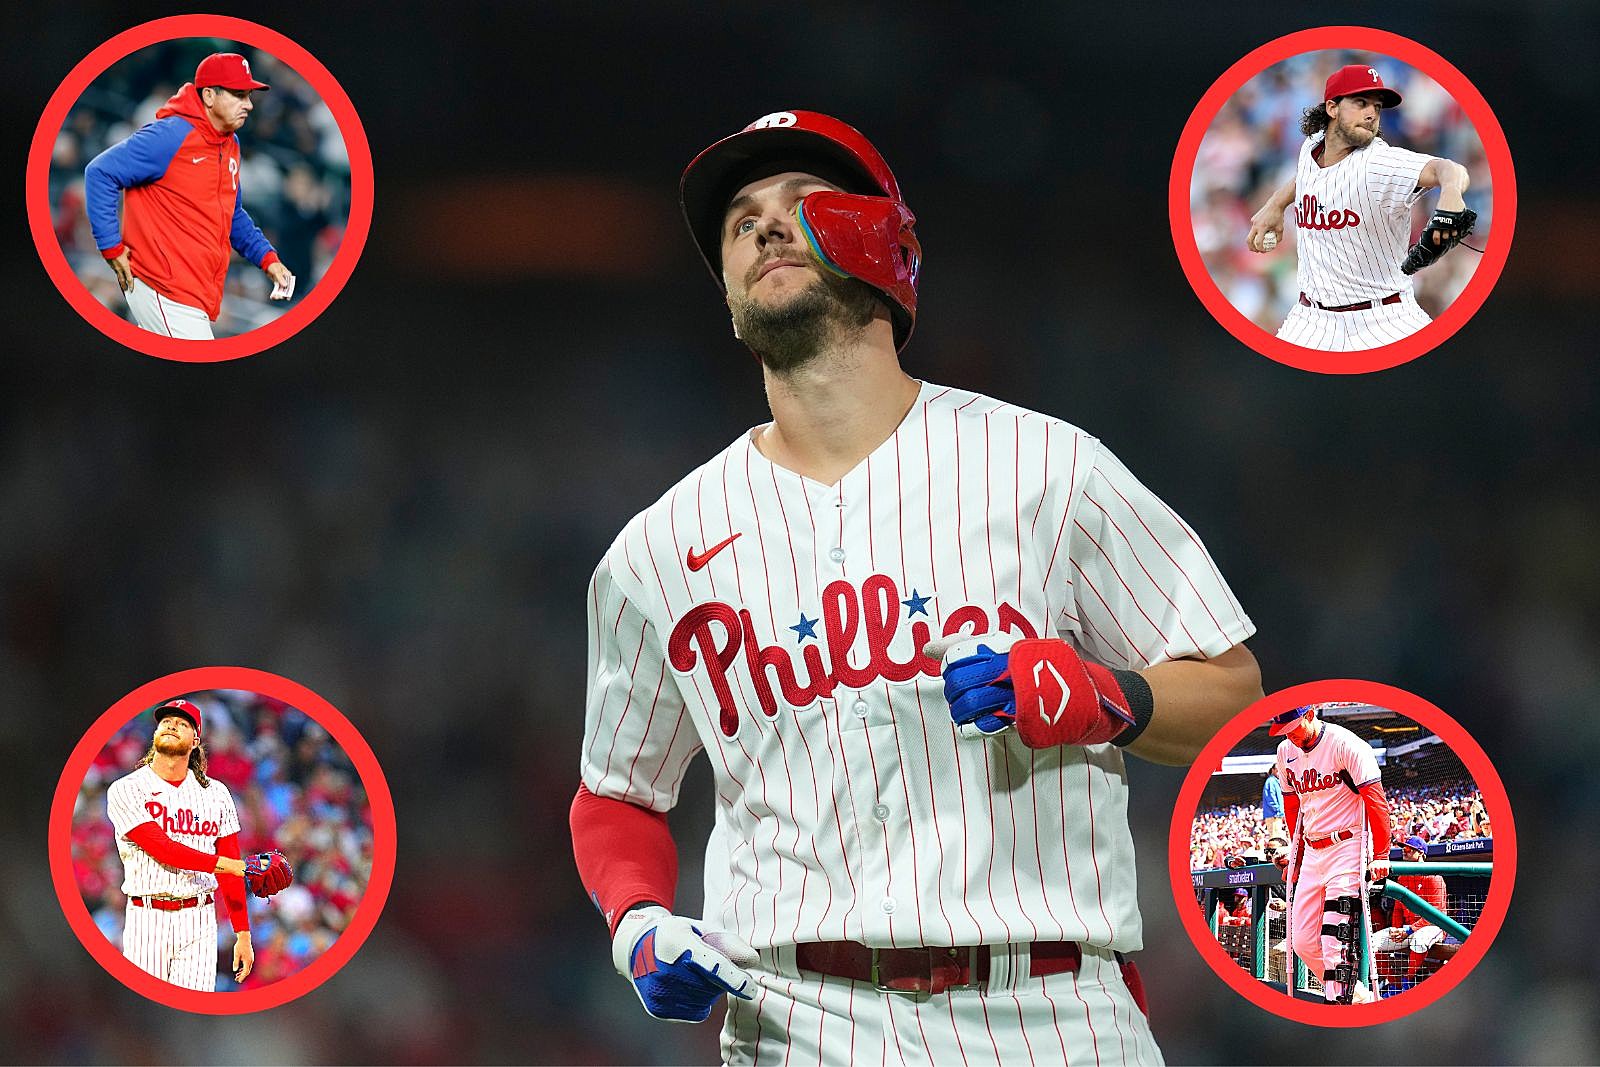 A look at the Philadelphia Phillies after 35 games of the season